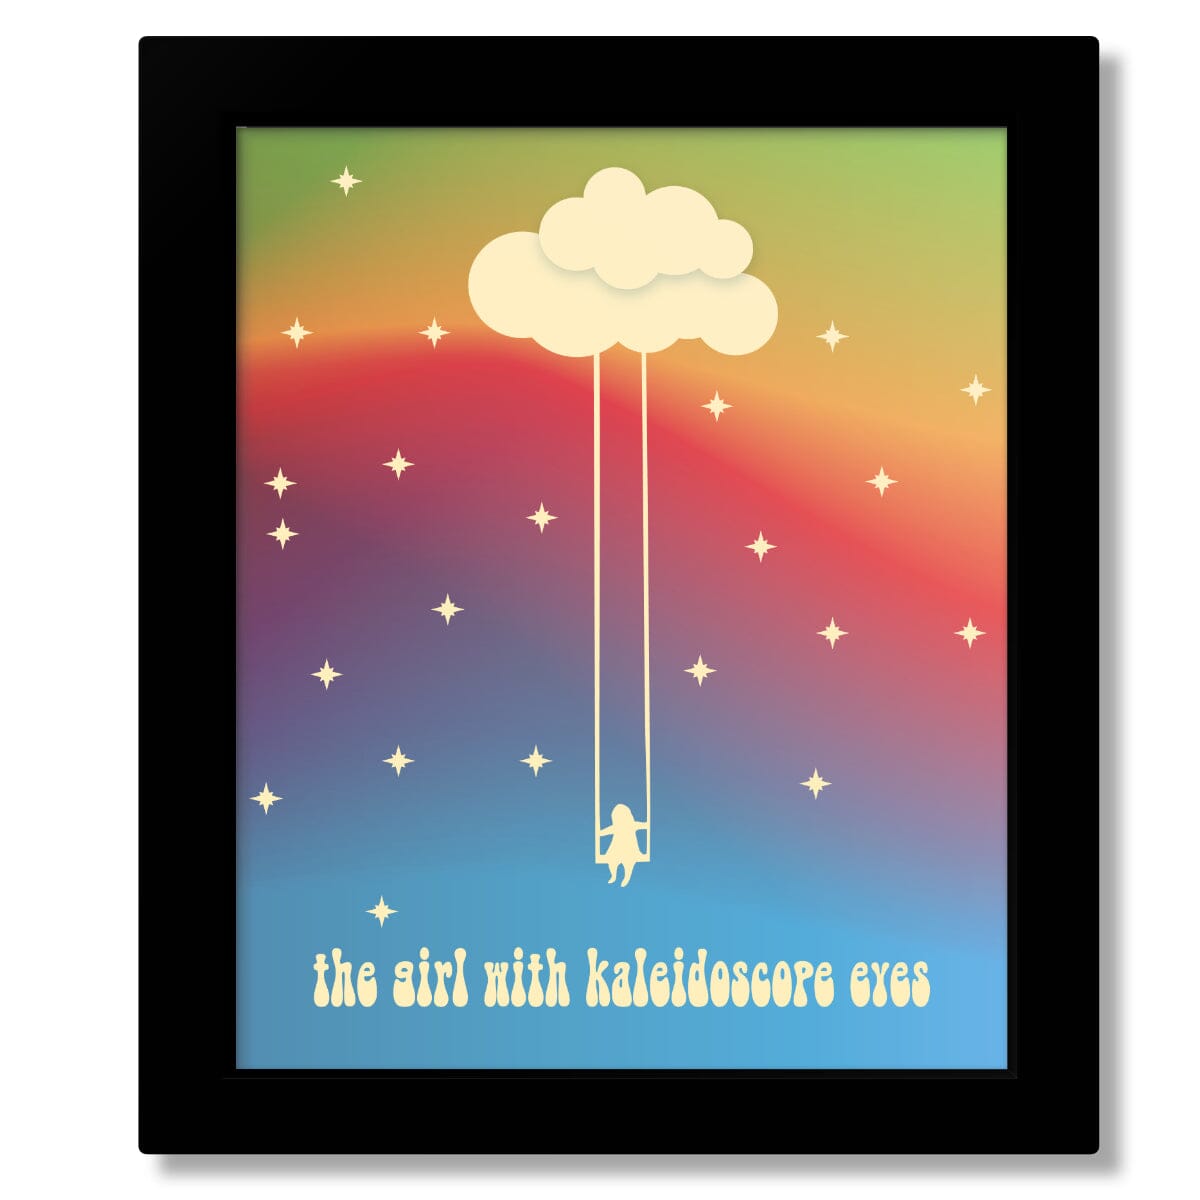 Lucy in the Sky with Diamonds by Beatles - Song Lyric Art Song Lyrics Art Song Lyrics Art 8x10 Framed Print (without mat) 